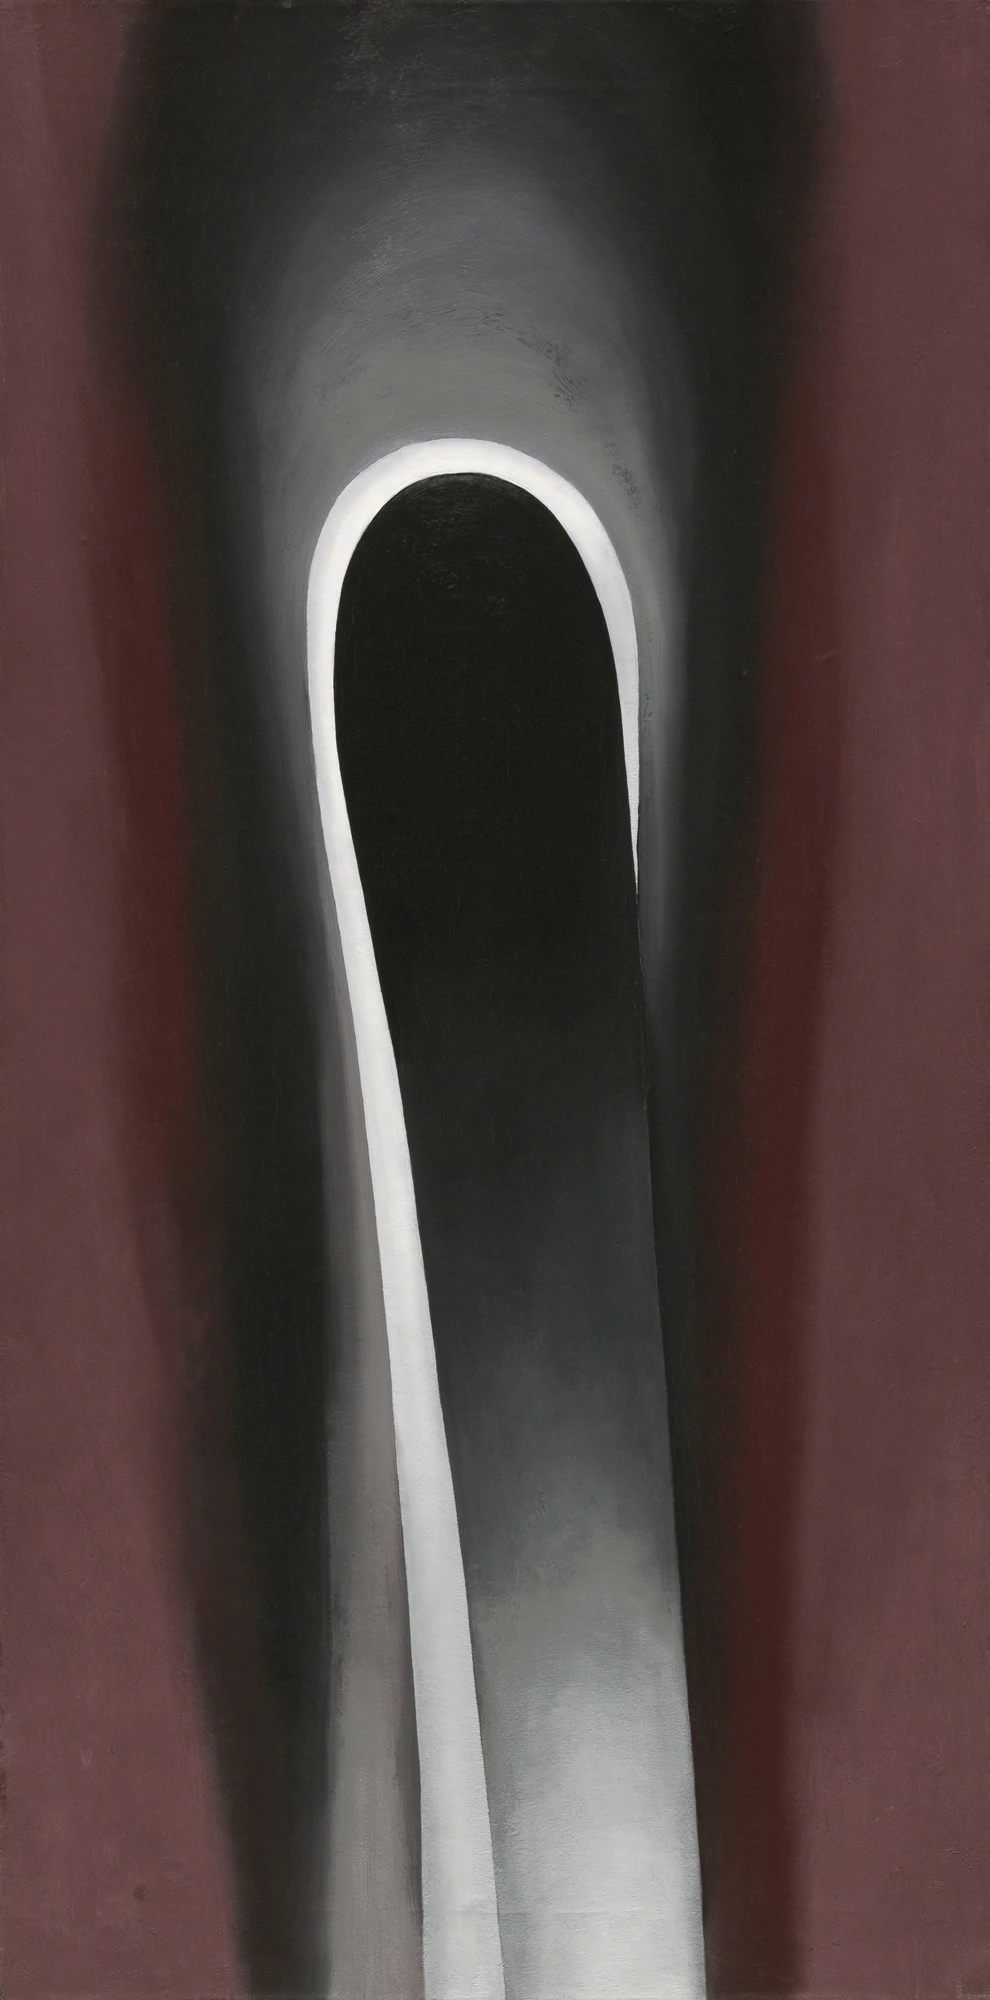 Jack-in-the-Pulpit No. 6, Georgia O'Keeffe